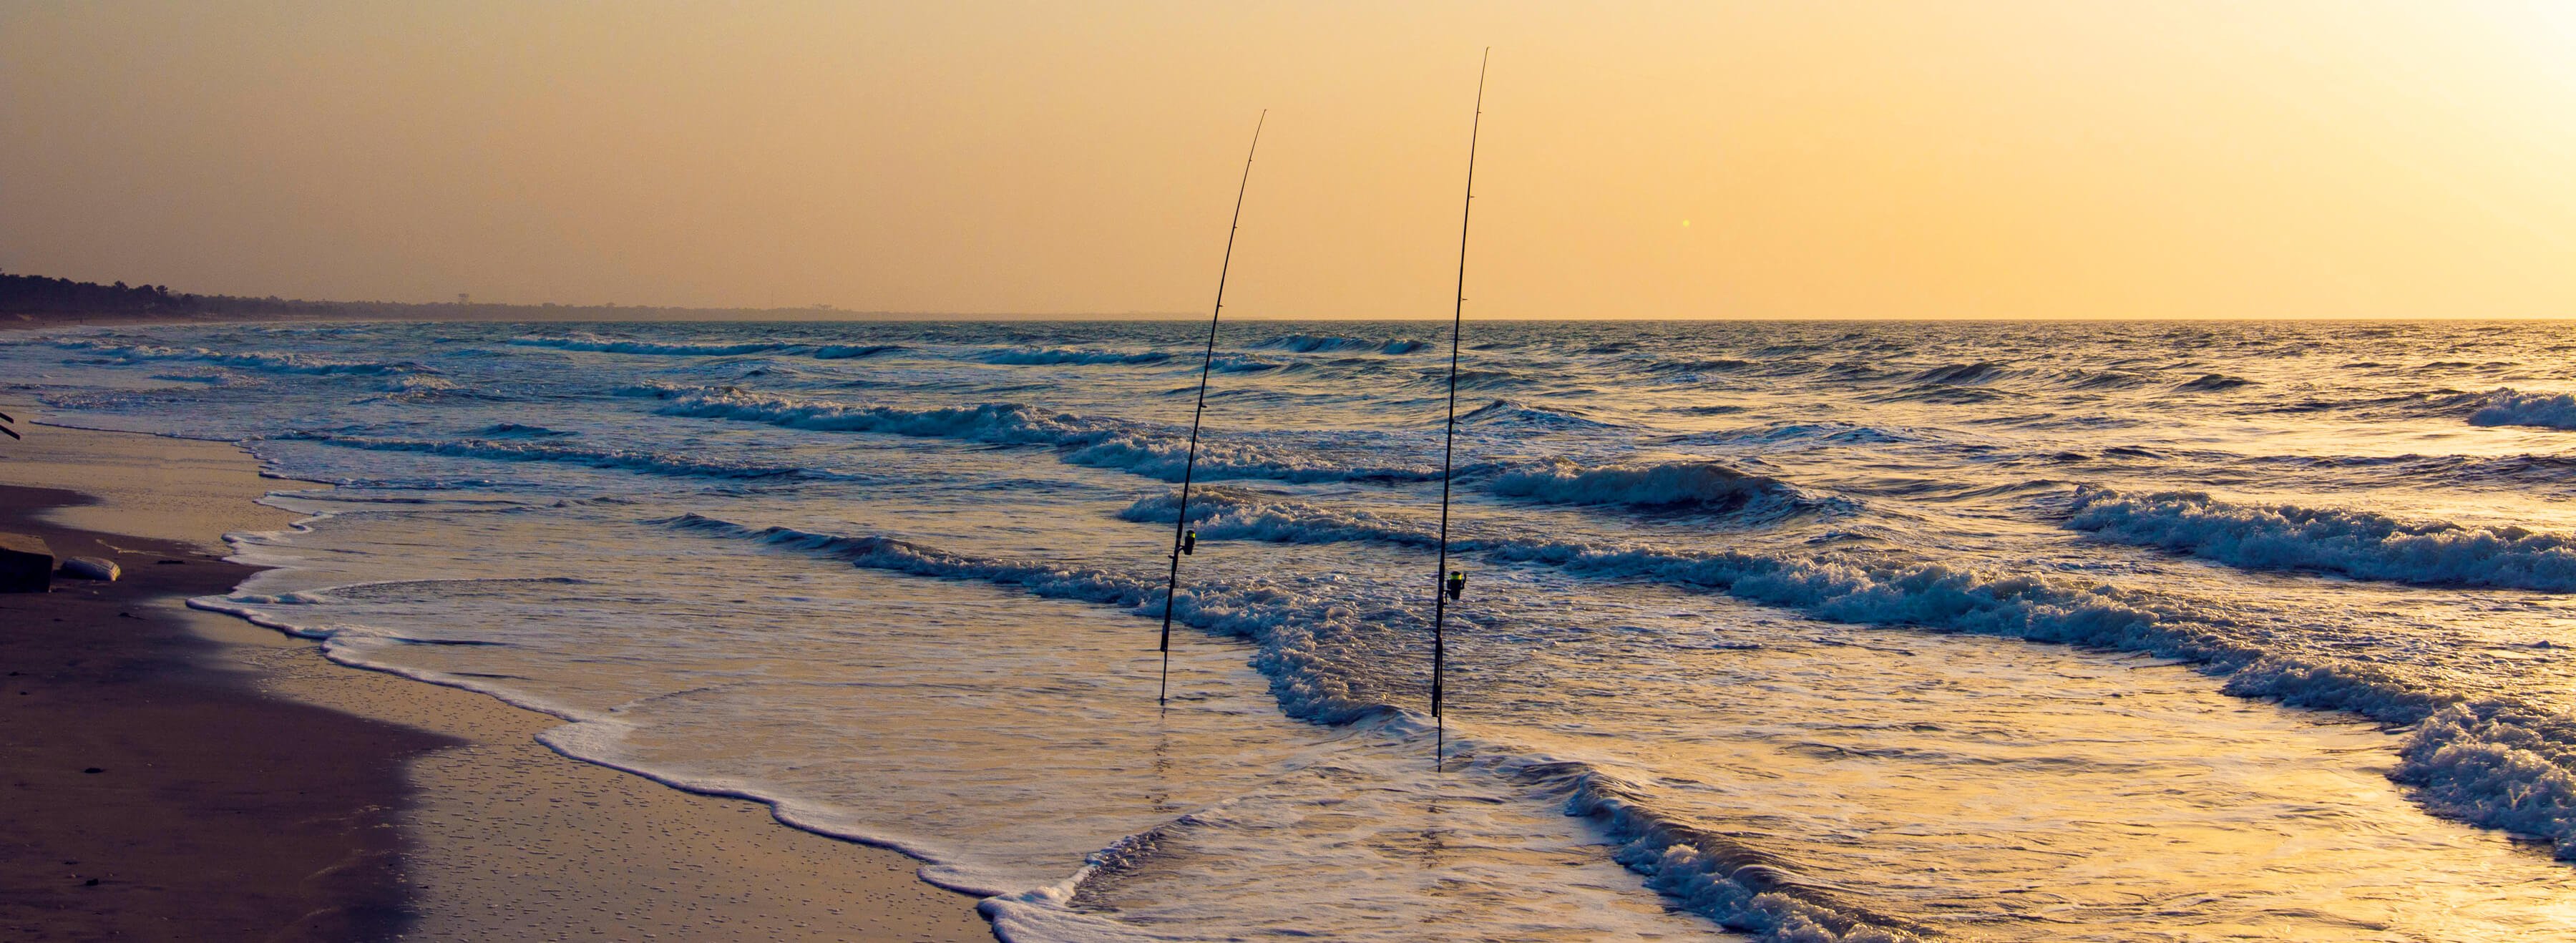 Fishing rods on beach at sunset